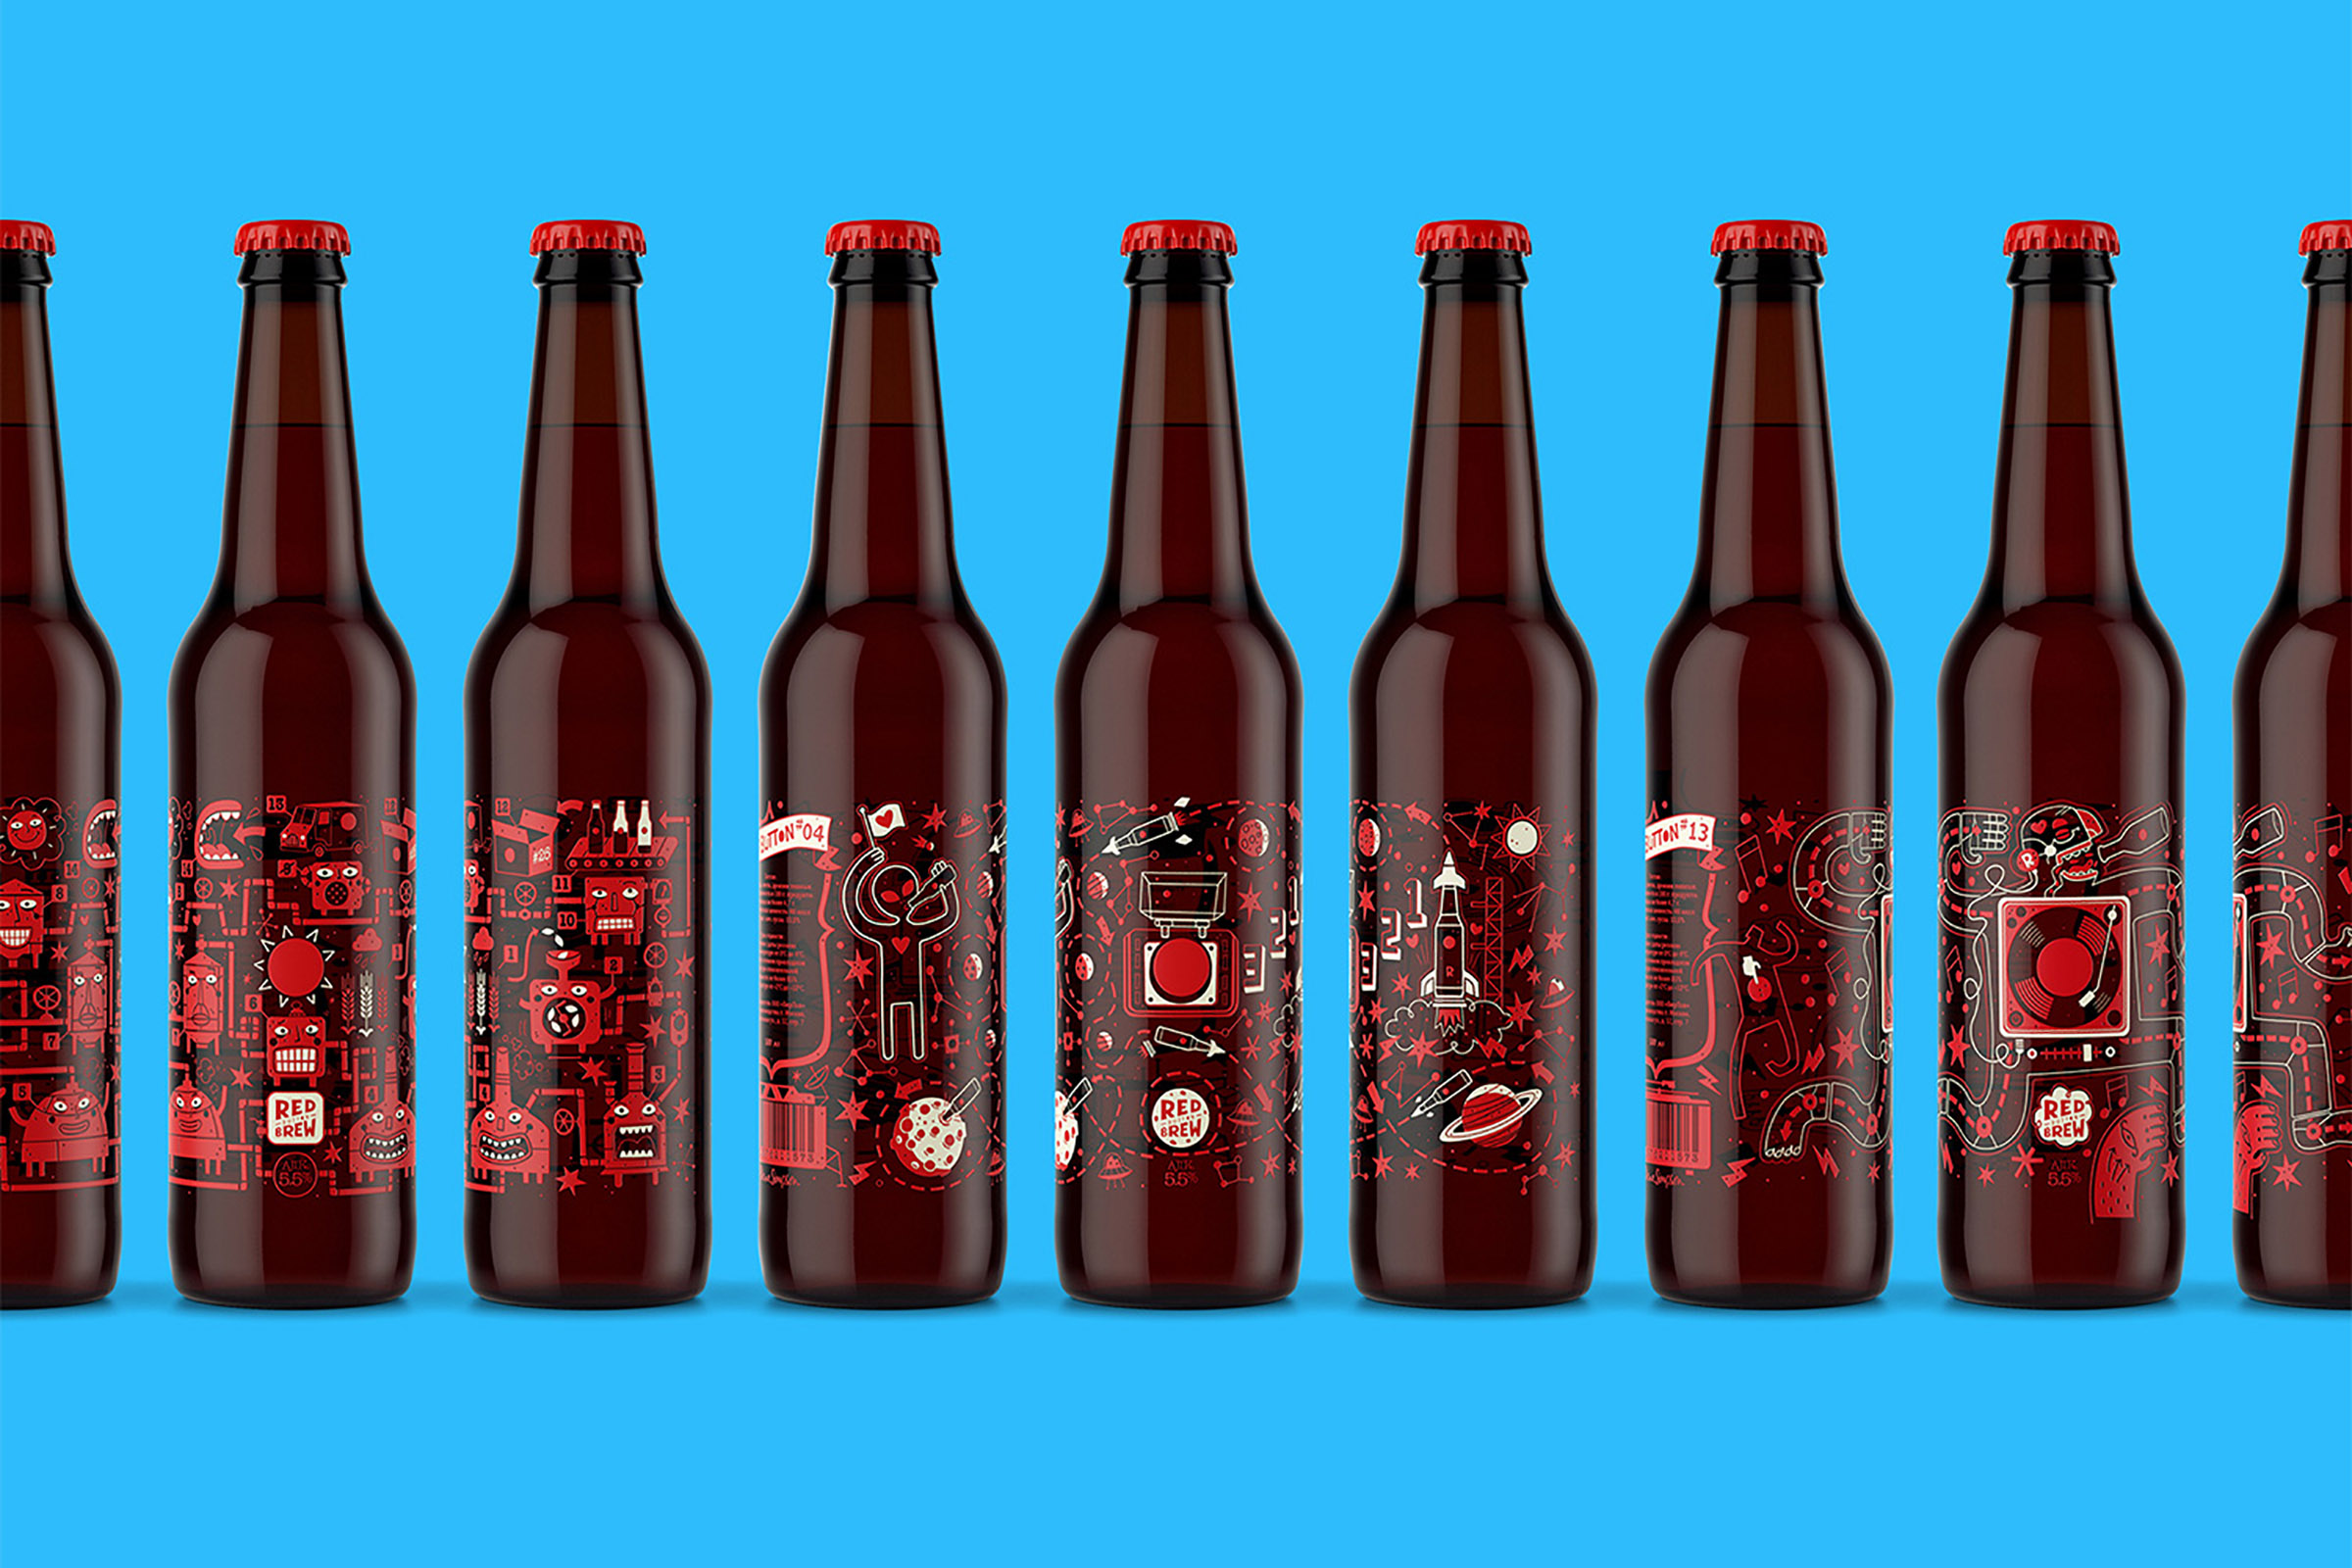 This Moscow-Based Beer Company Dares You To Push The Red Button